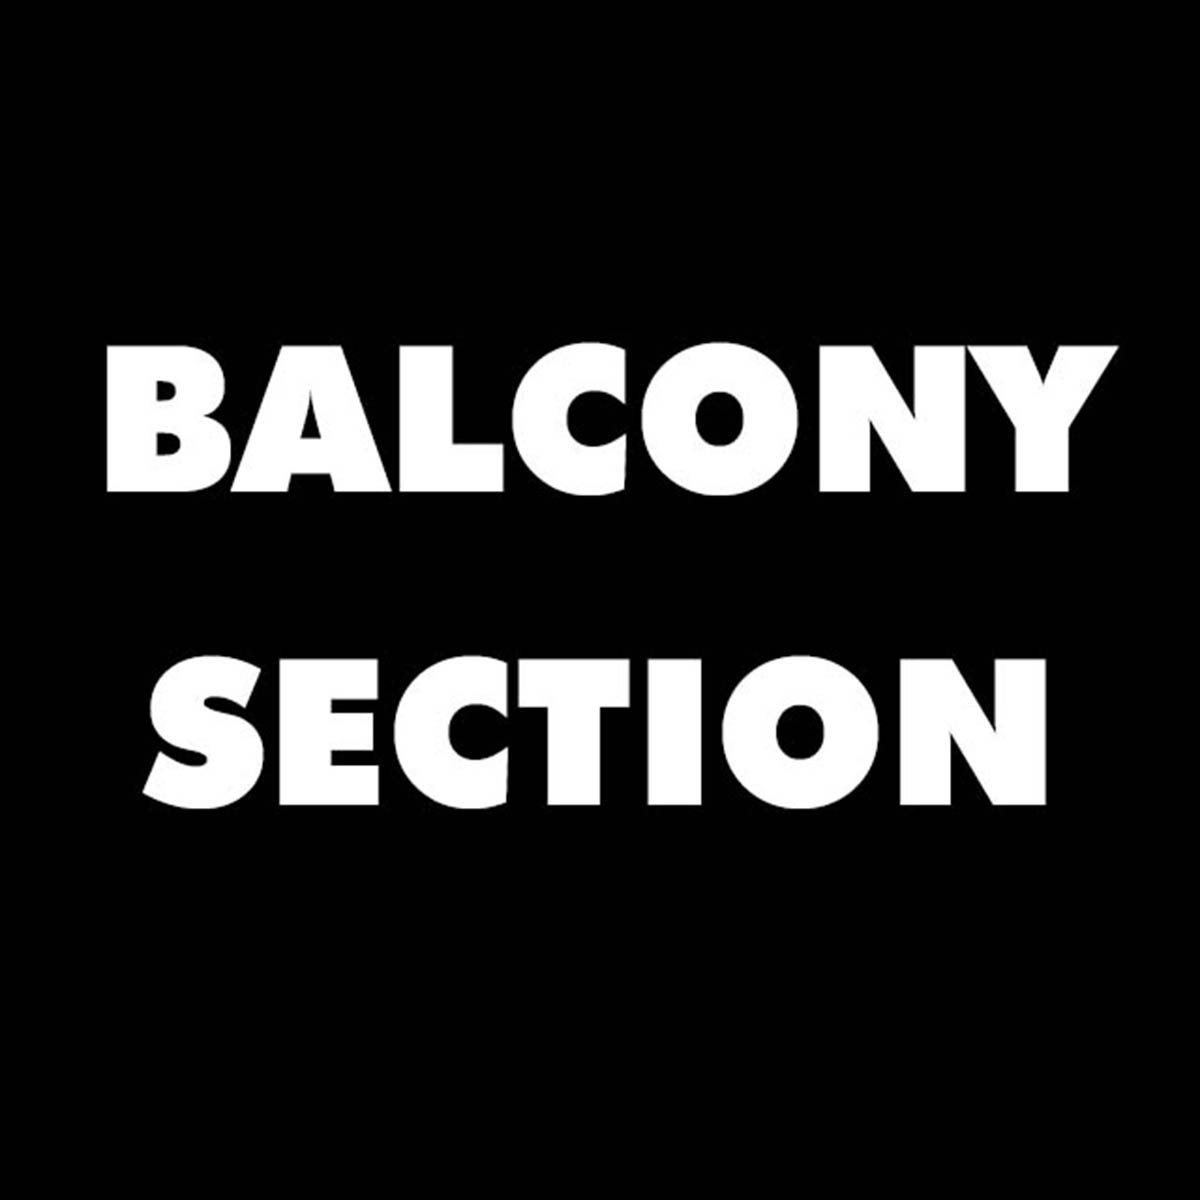 In the End - Linkin Park Experience BALCONY SECTION